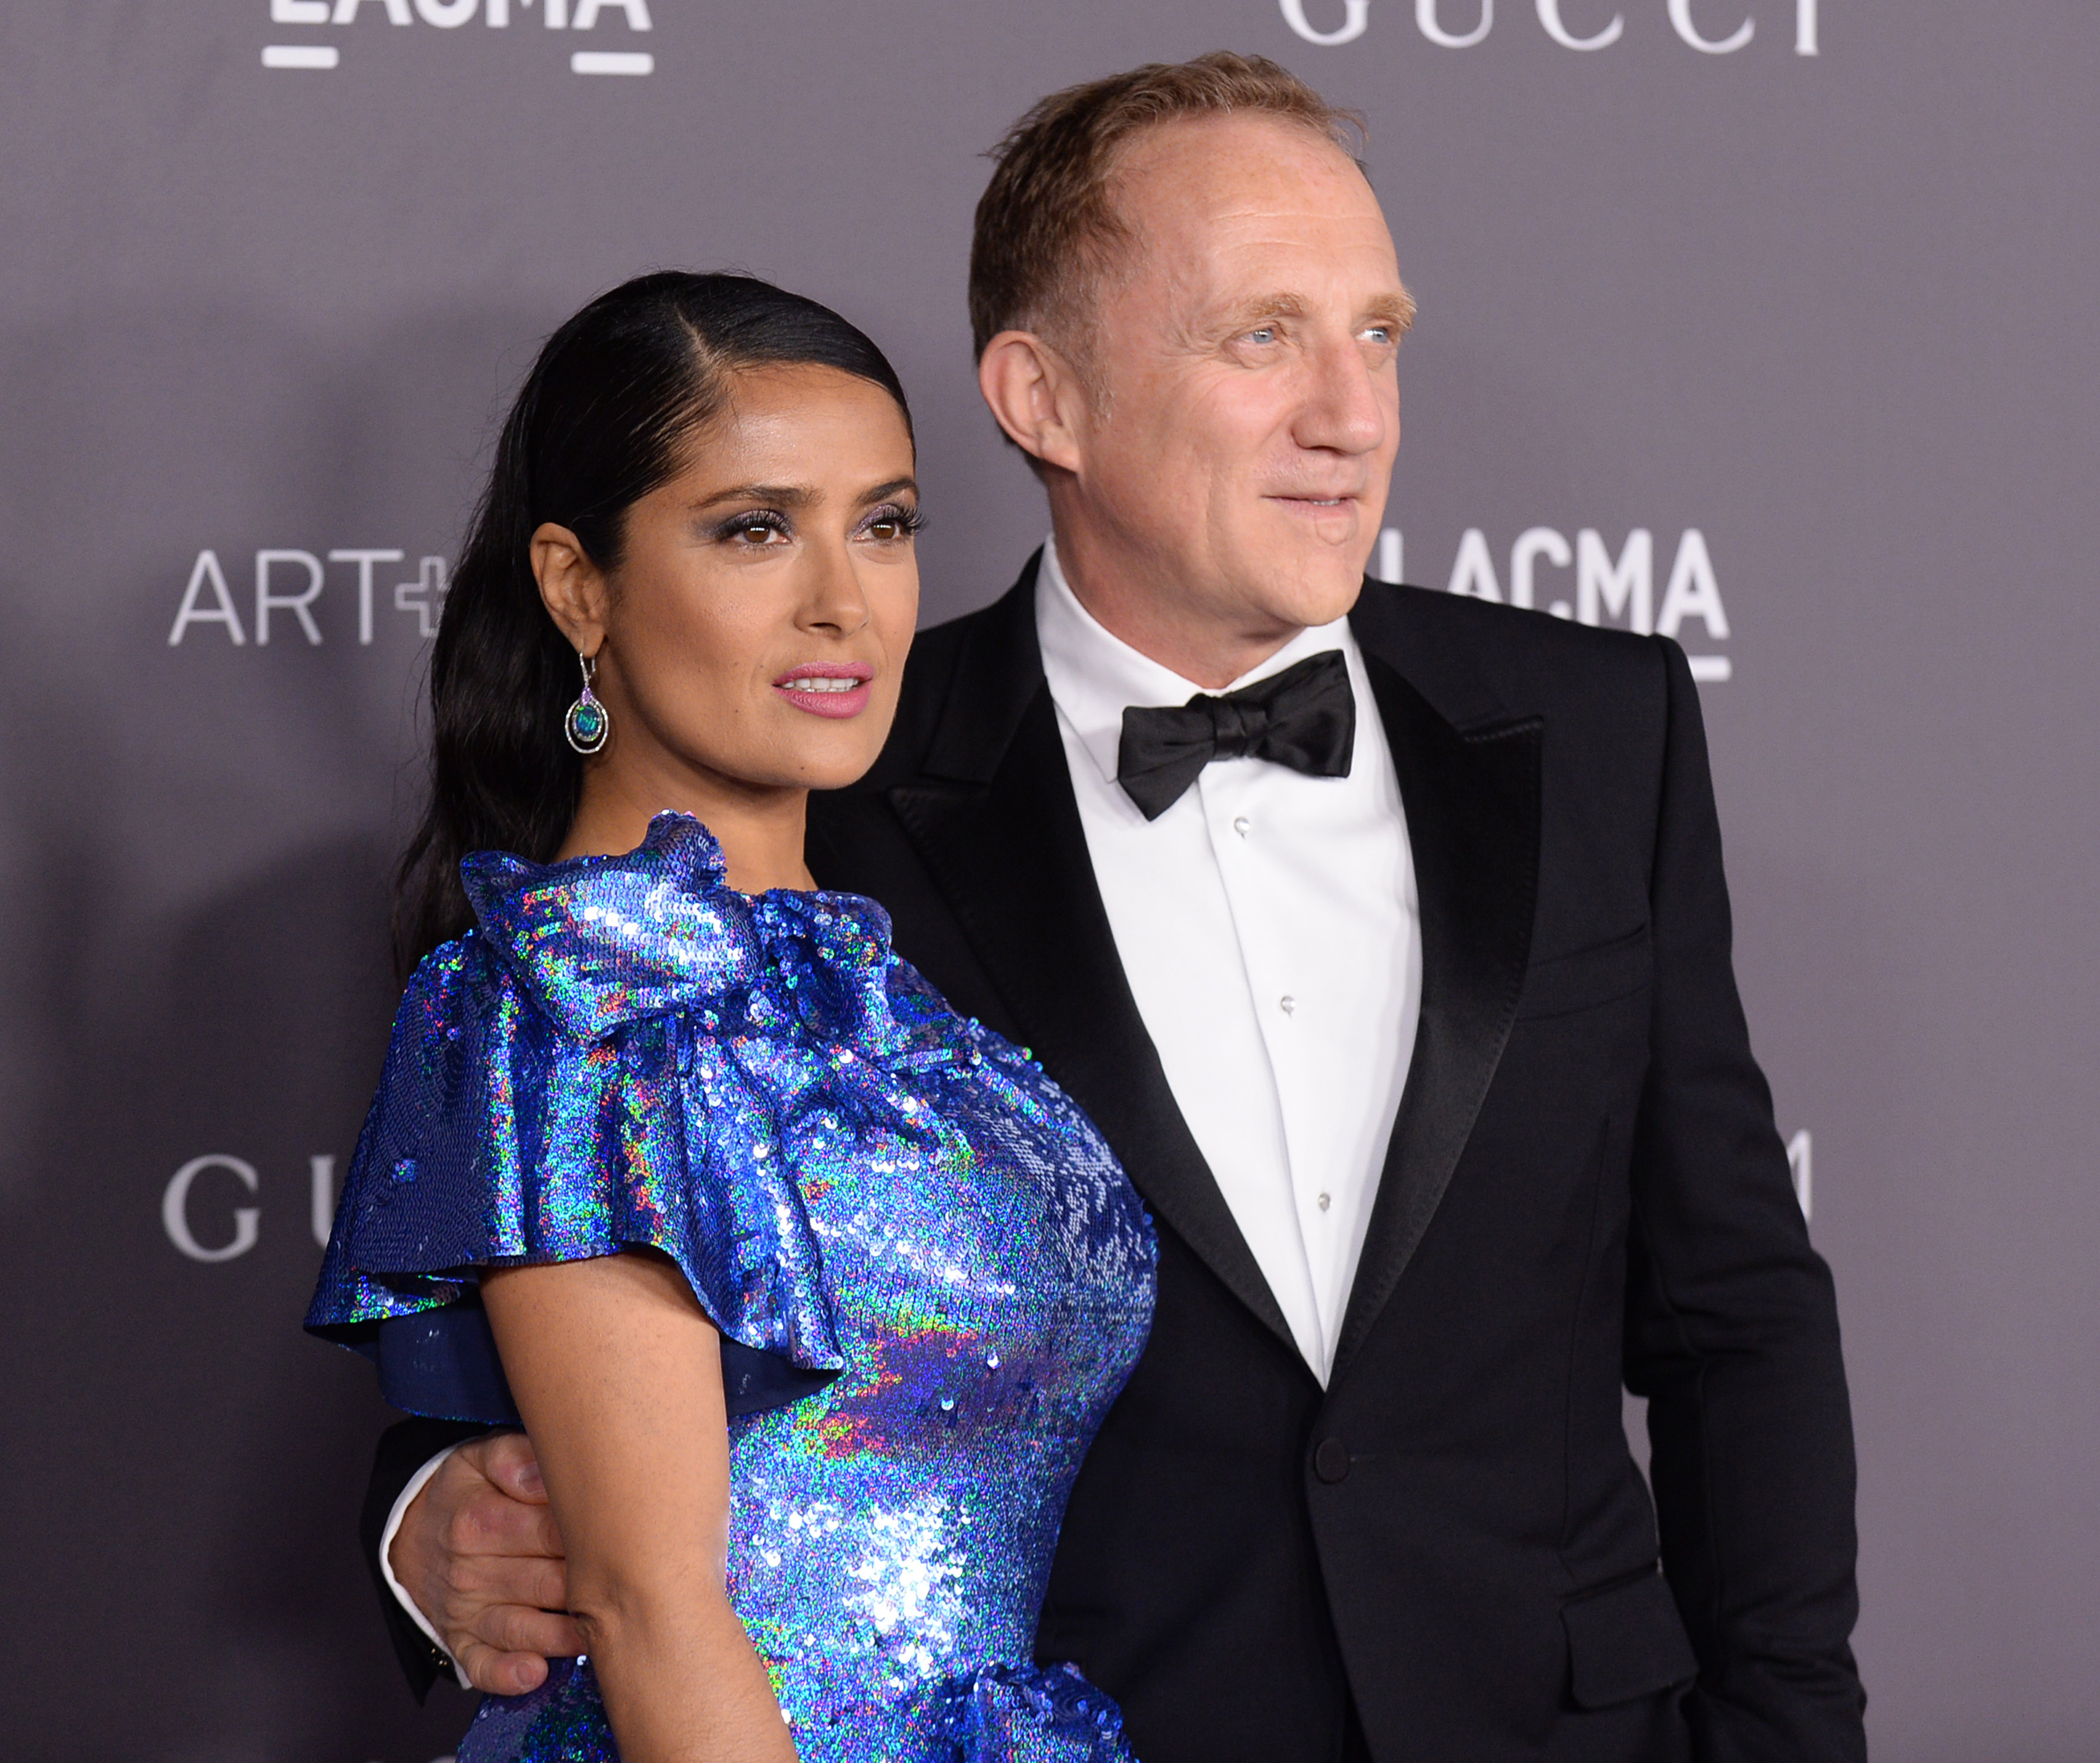 Are Salma Hayek and her wealthy French husband set to join 'l